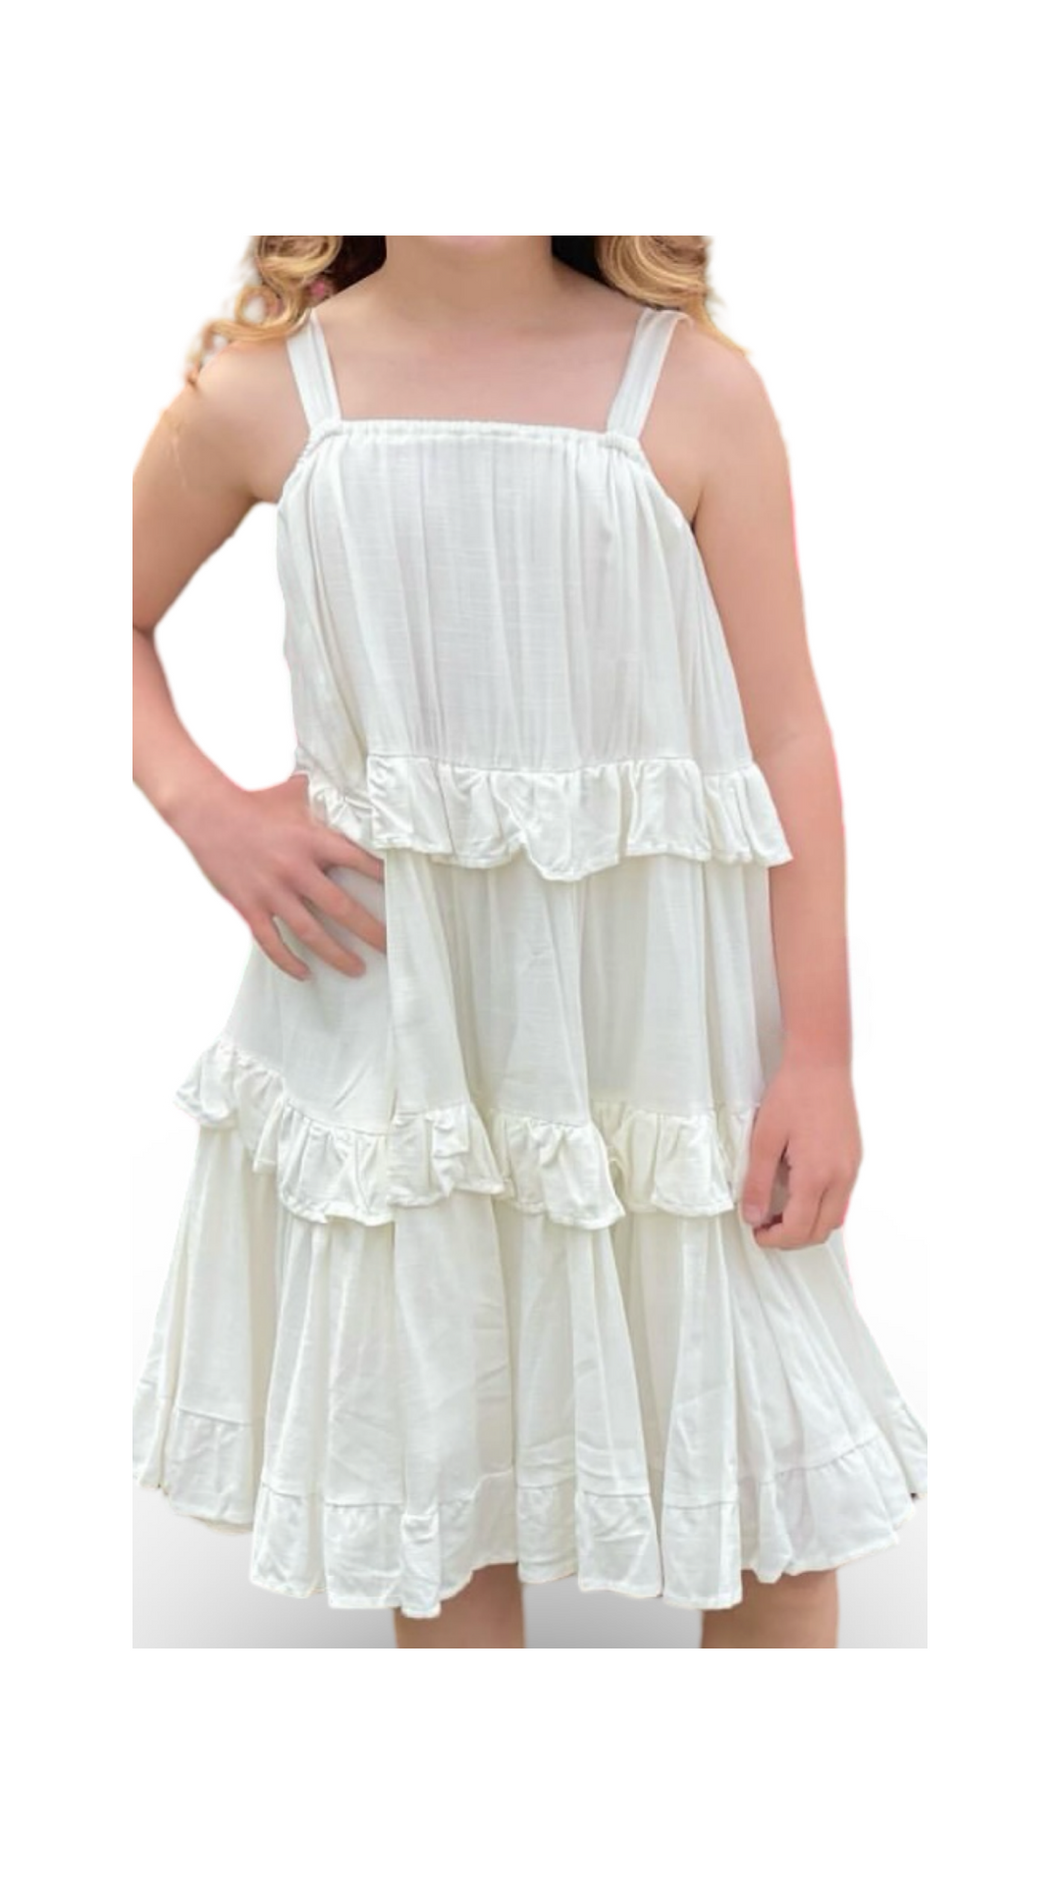 .White Tiered & Ruffled Mini Dress with Bow Strap